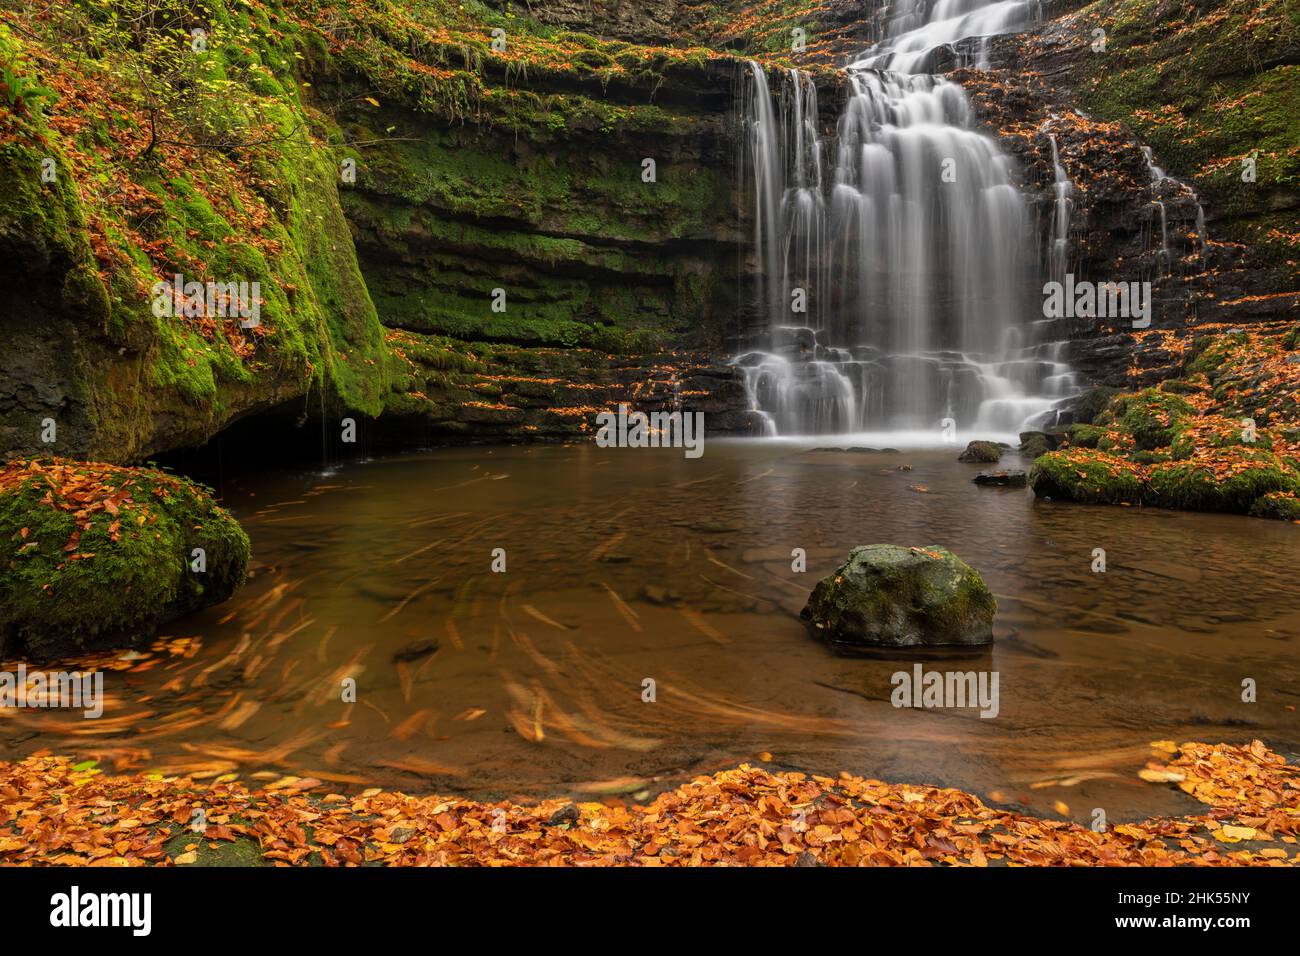 Scaleber Force waterfall in the Yorkshire Dales National Park, North Yorkshire, England, United Kingdom, Europe Stock Photo